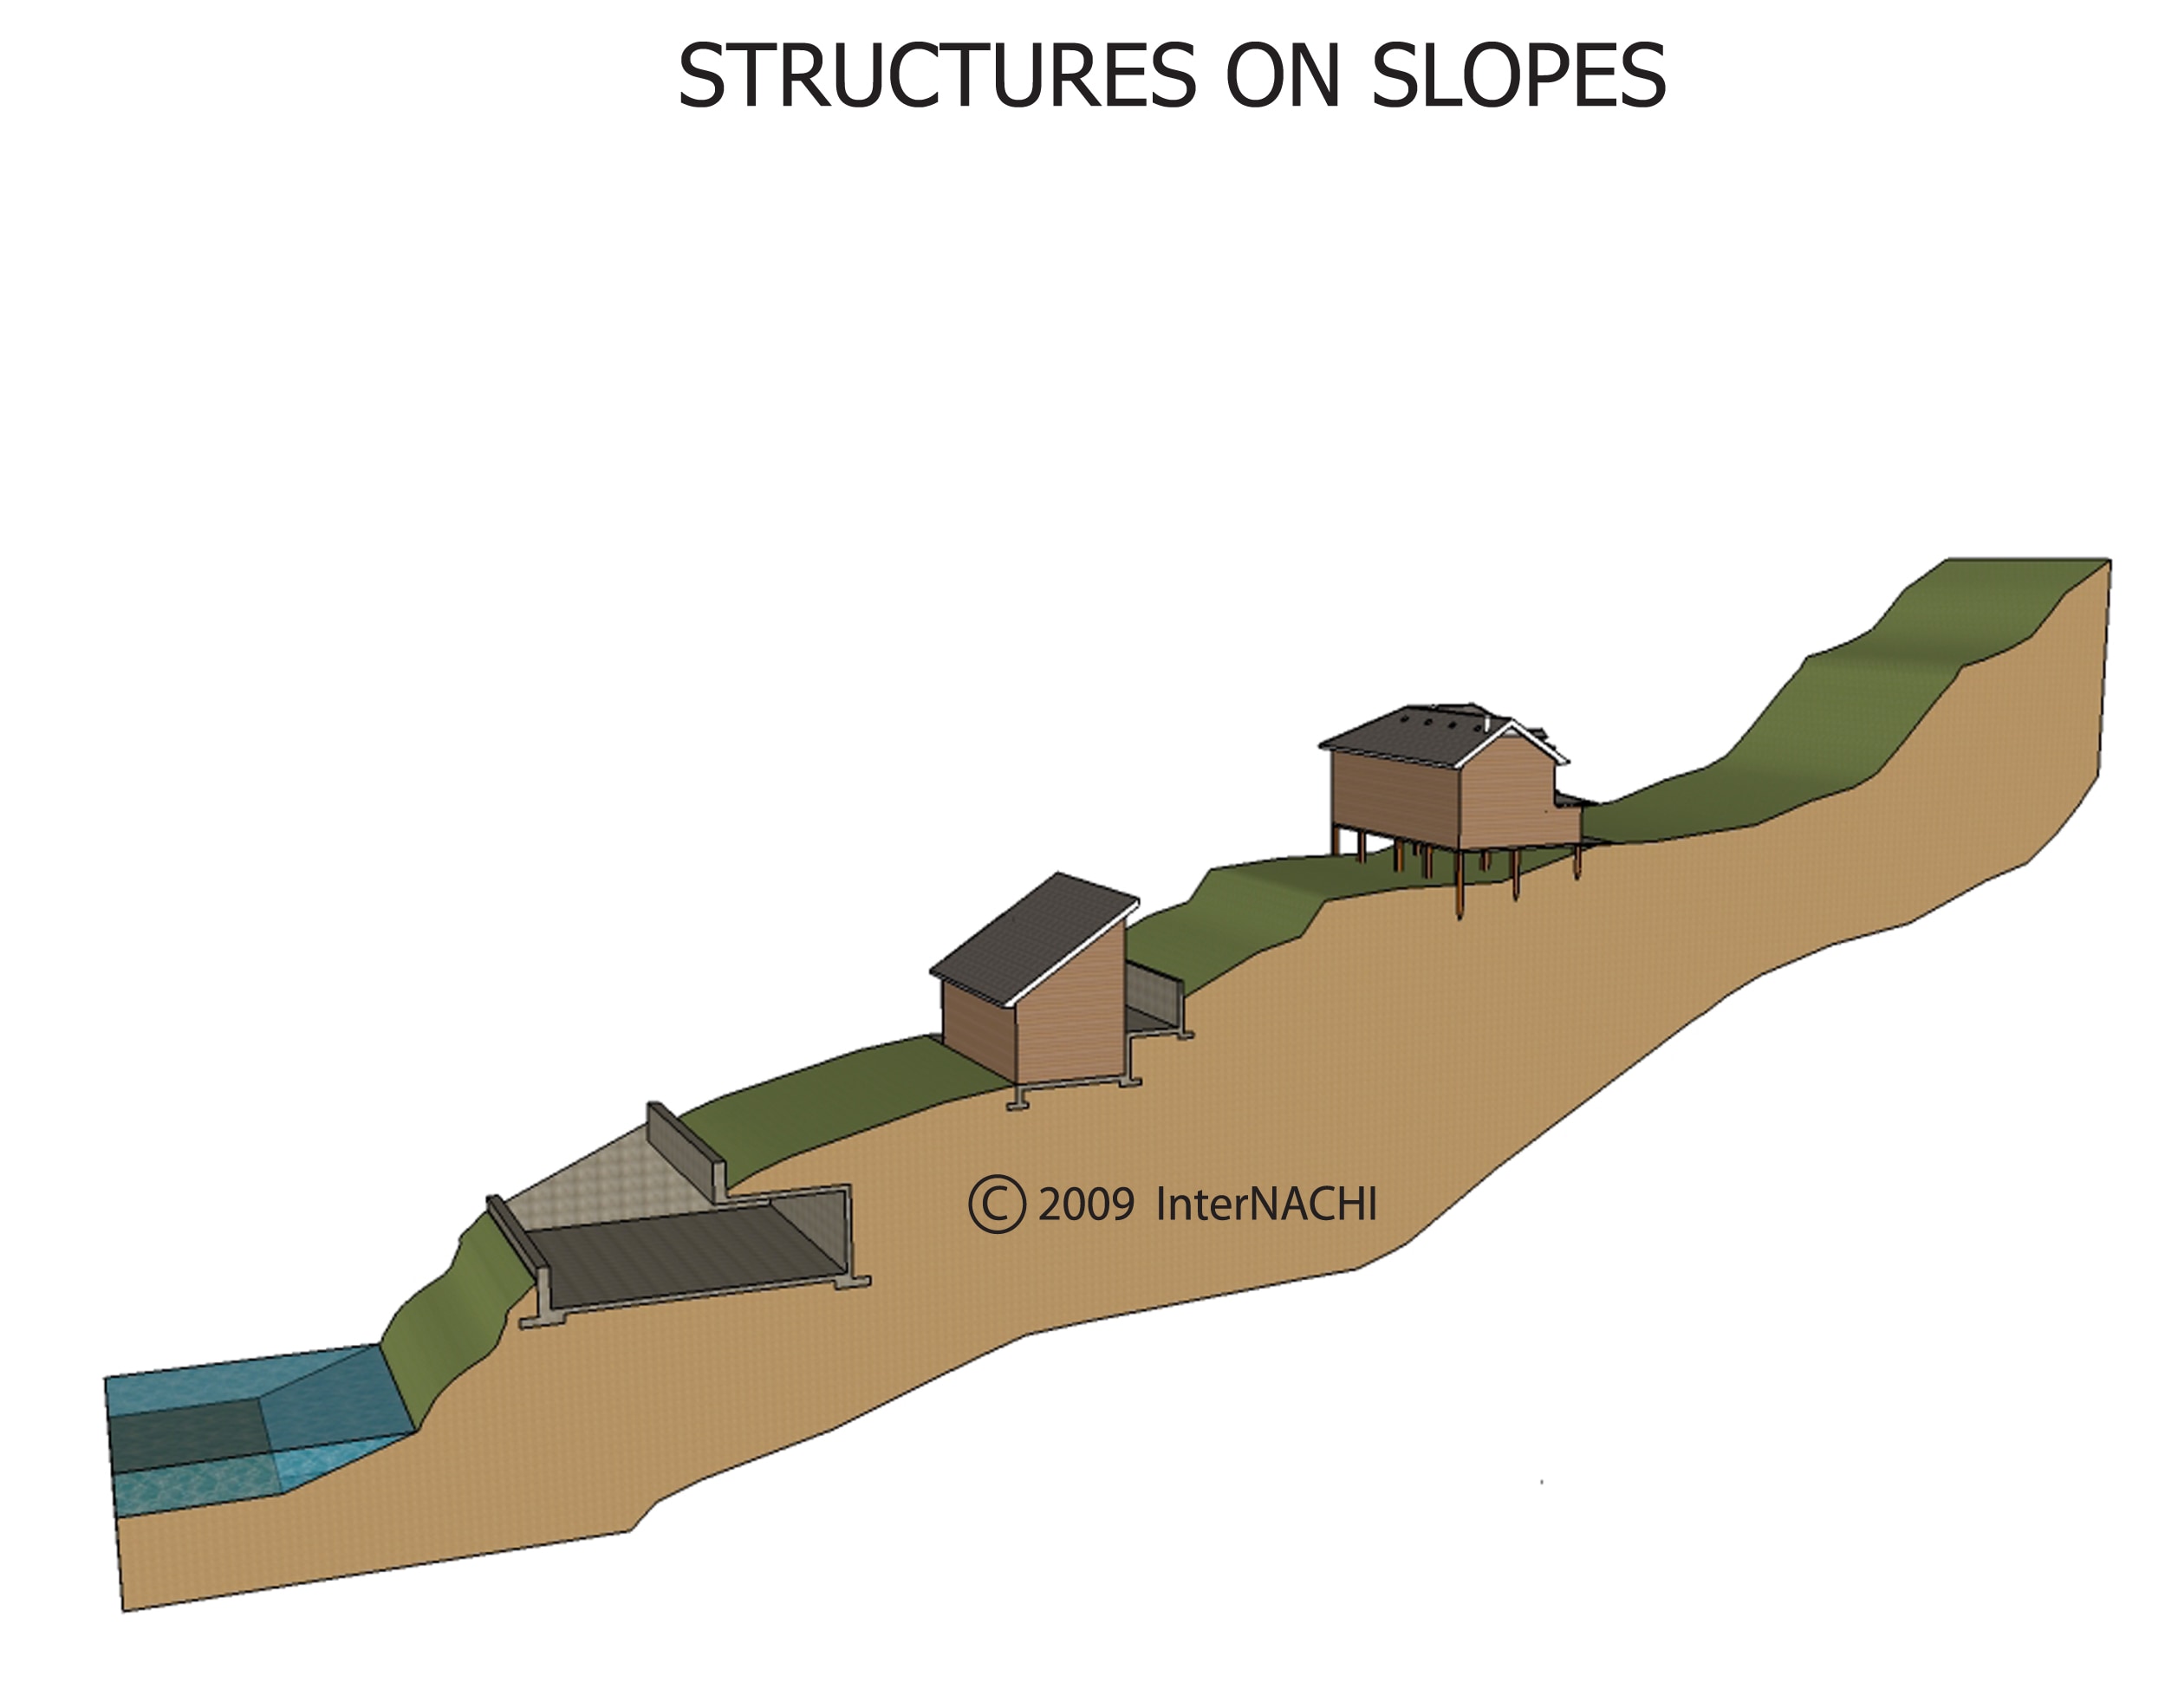 Structures on slopes.